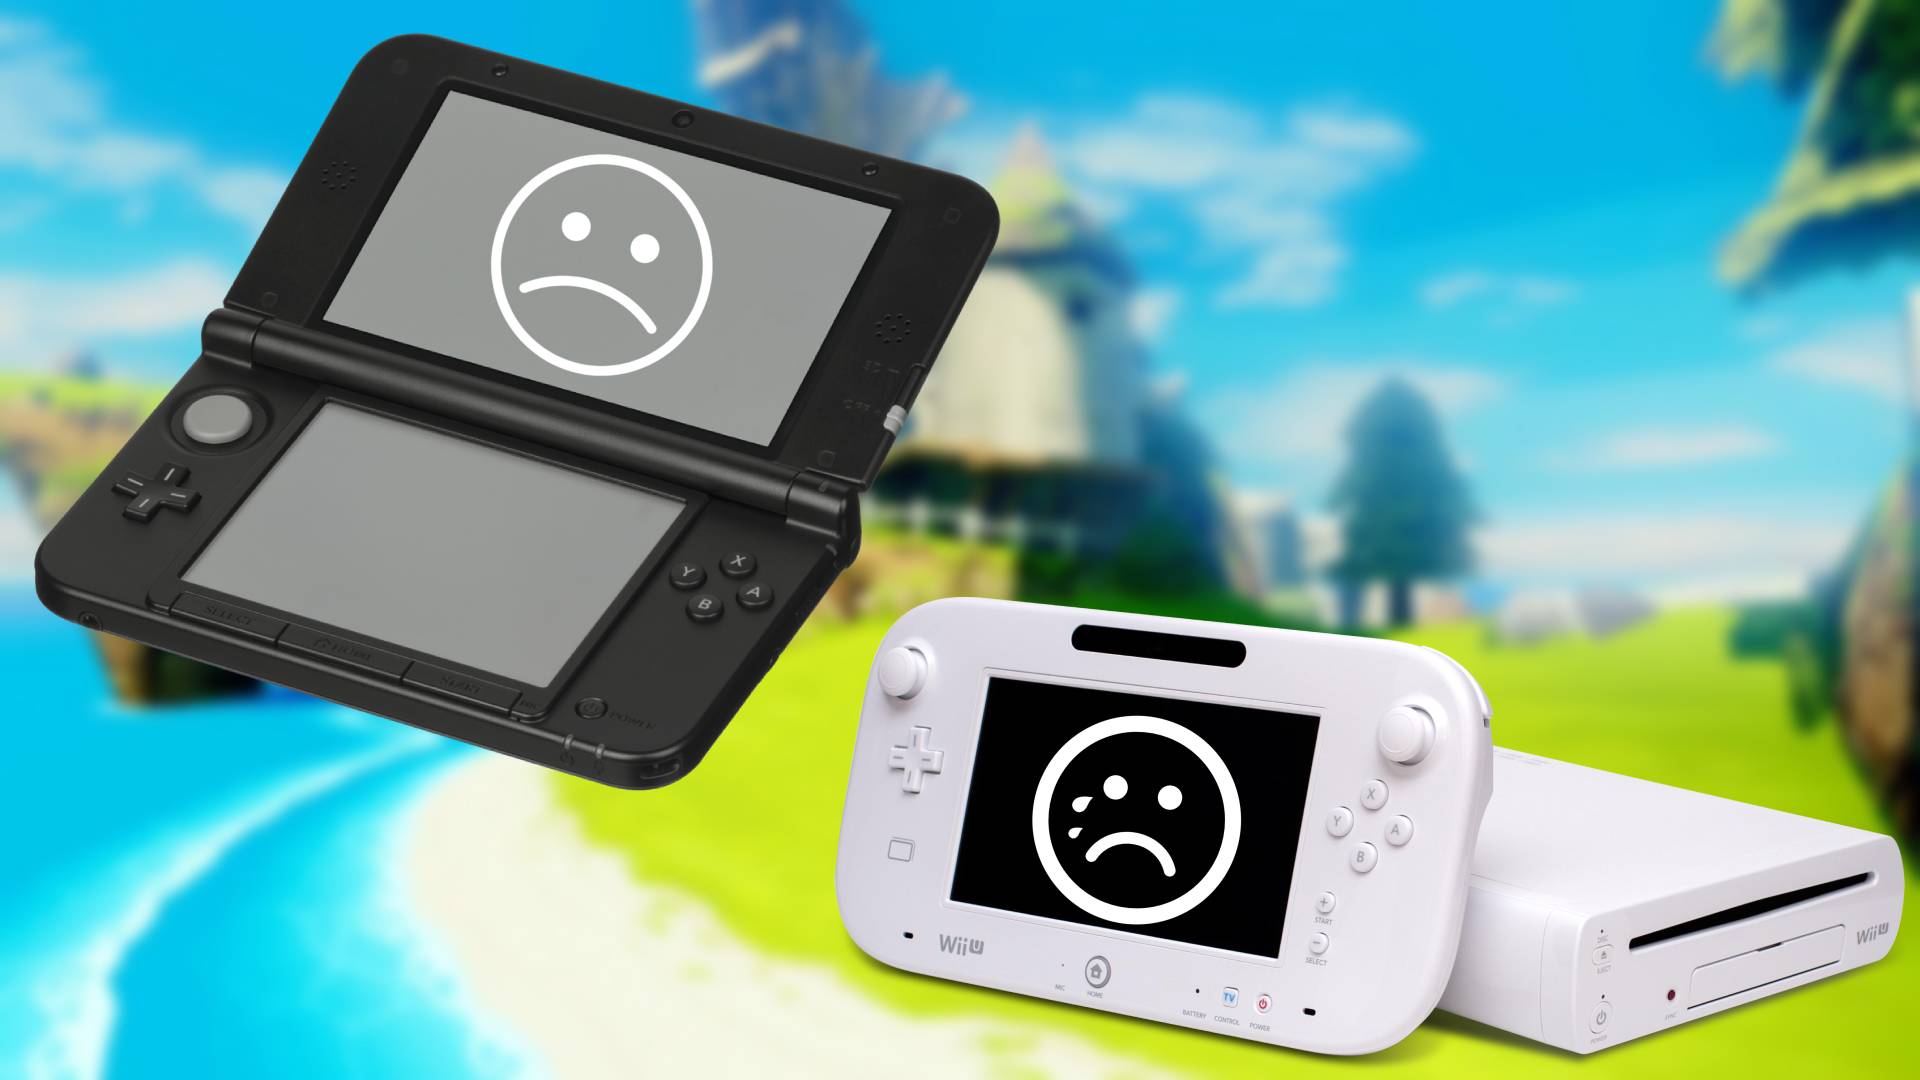 Nintendo is ending Wii U and 3DS eShop service